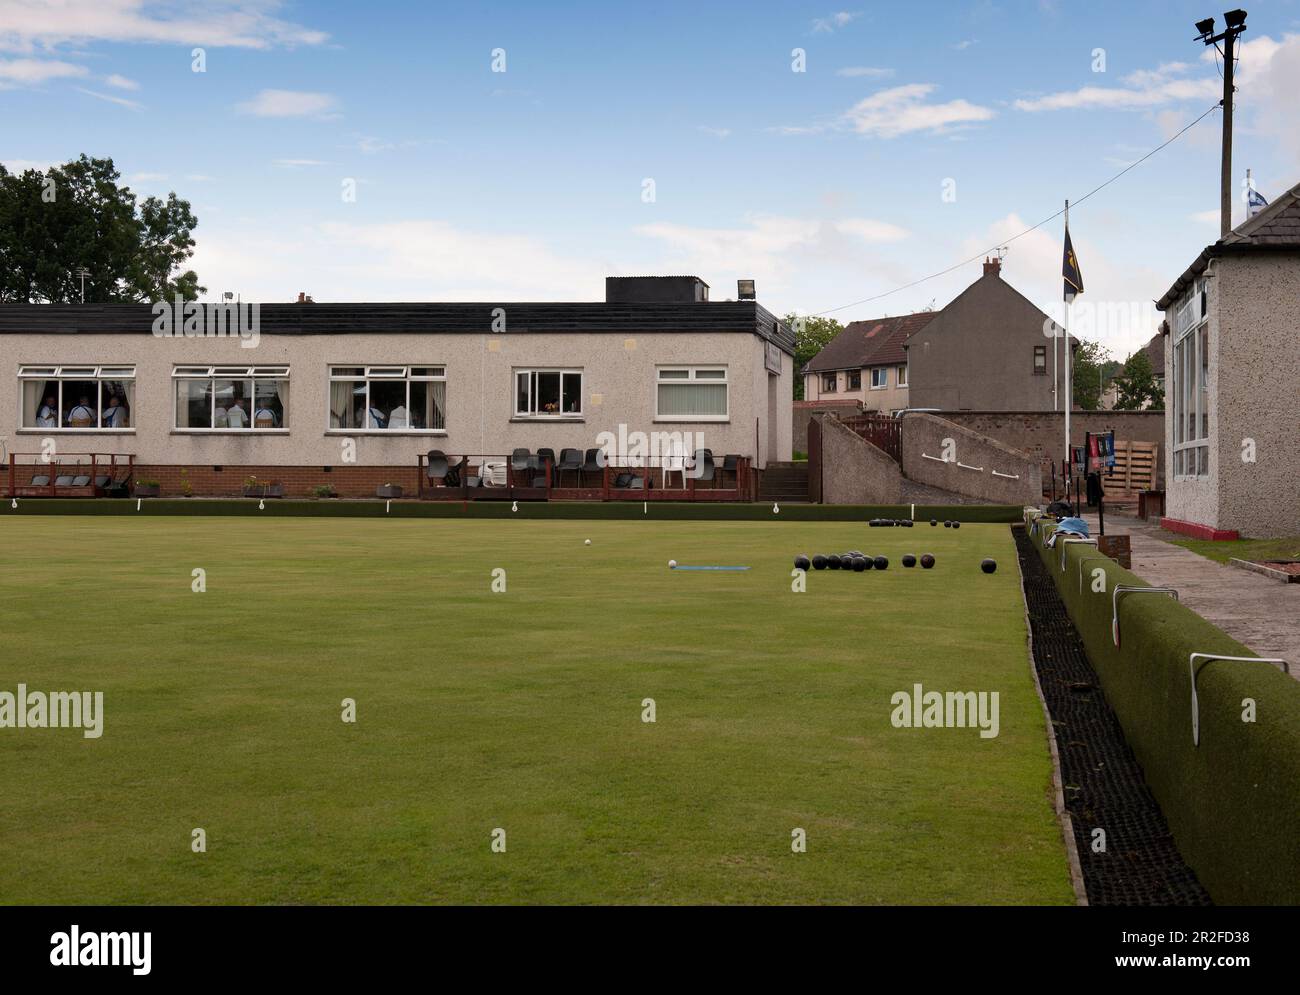 Bowling balls and mat infront of the club house at the Mauchline lawn bowling green in Mauchline; Ayrshire, Scotland, UK Stock Photo